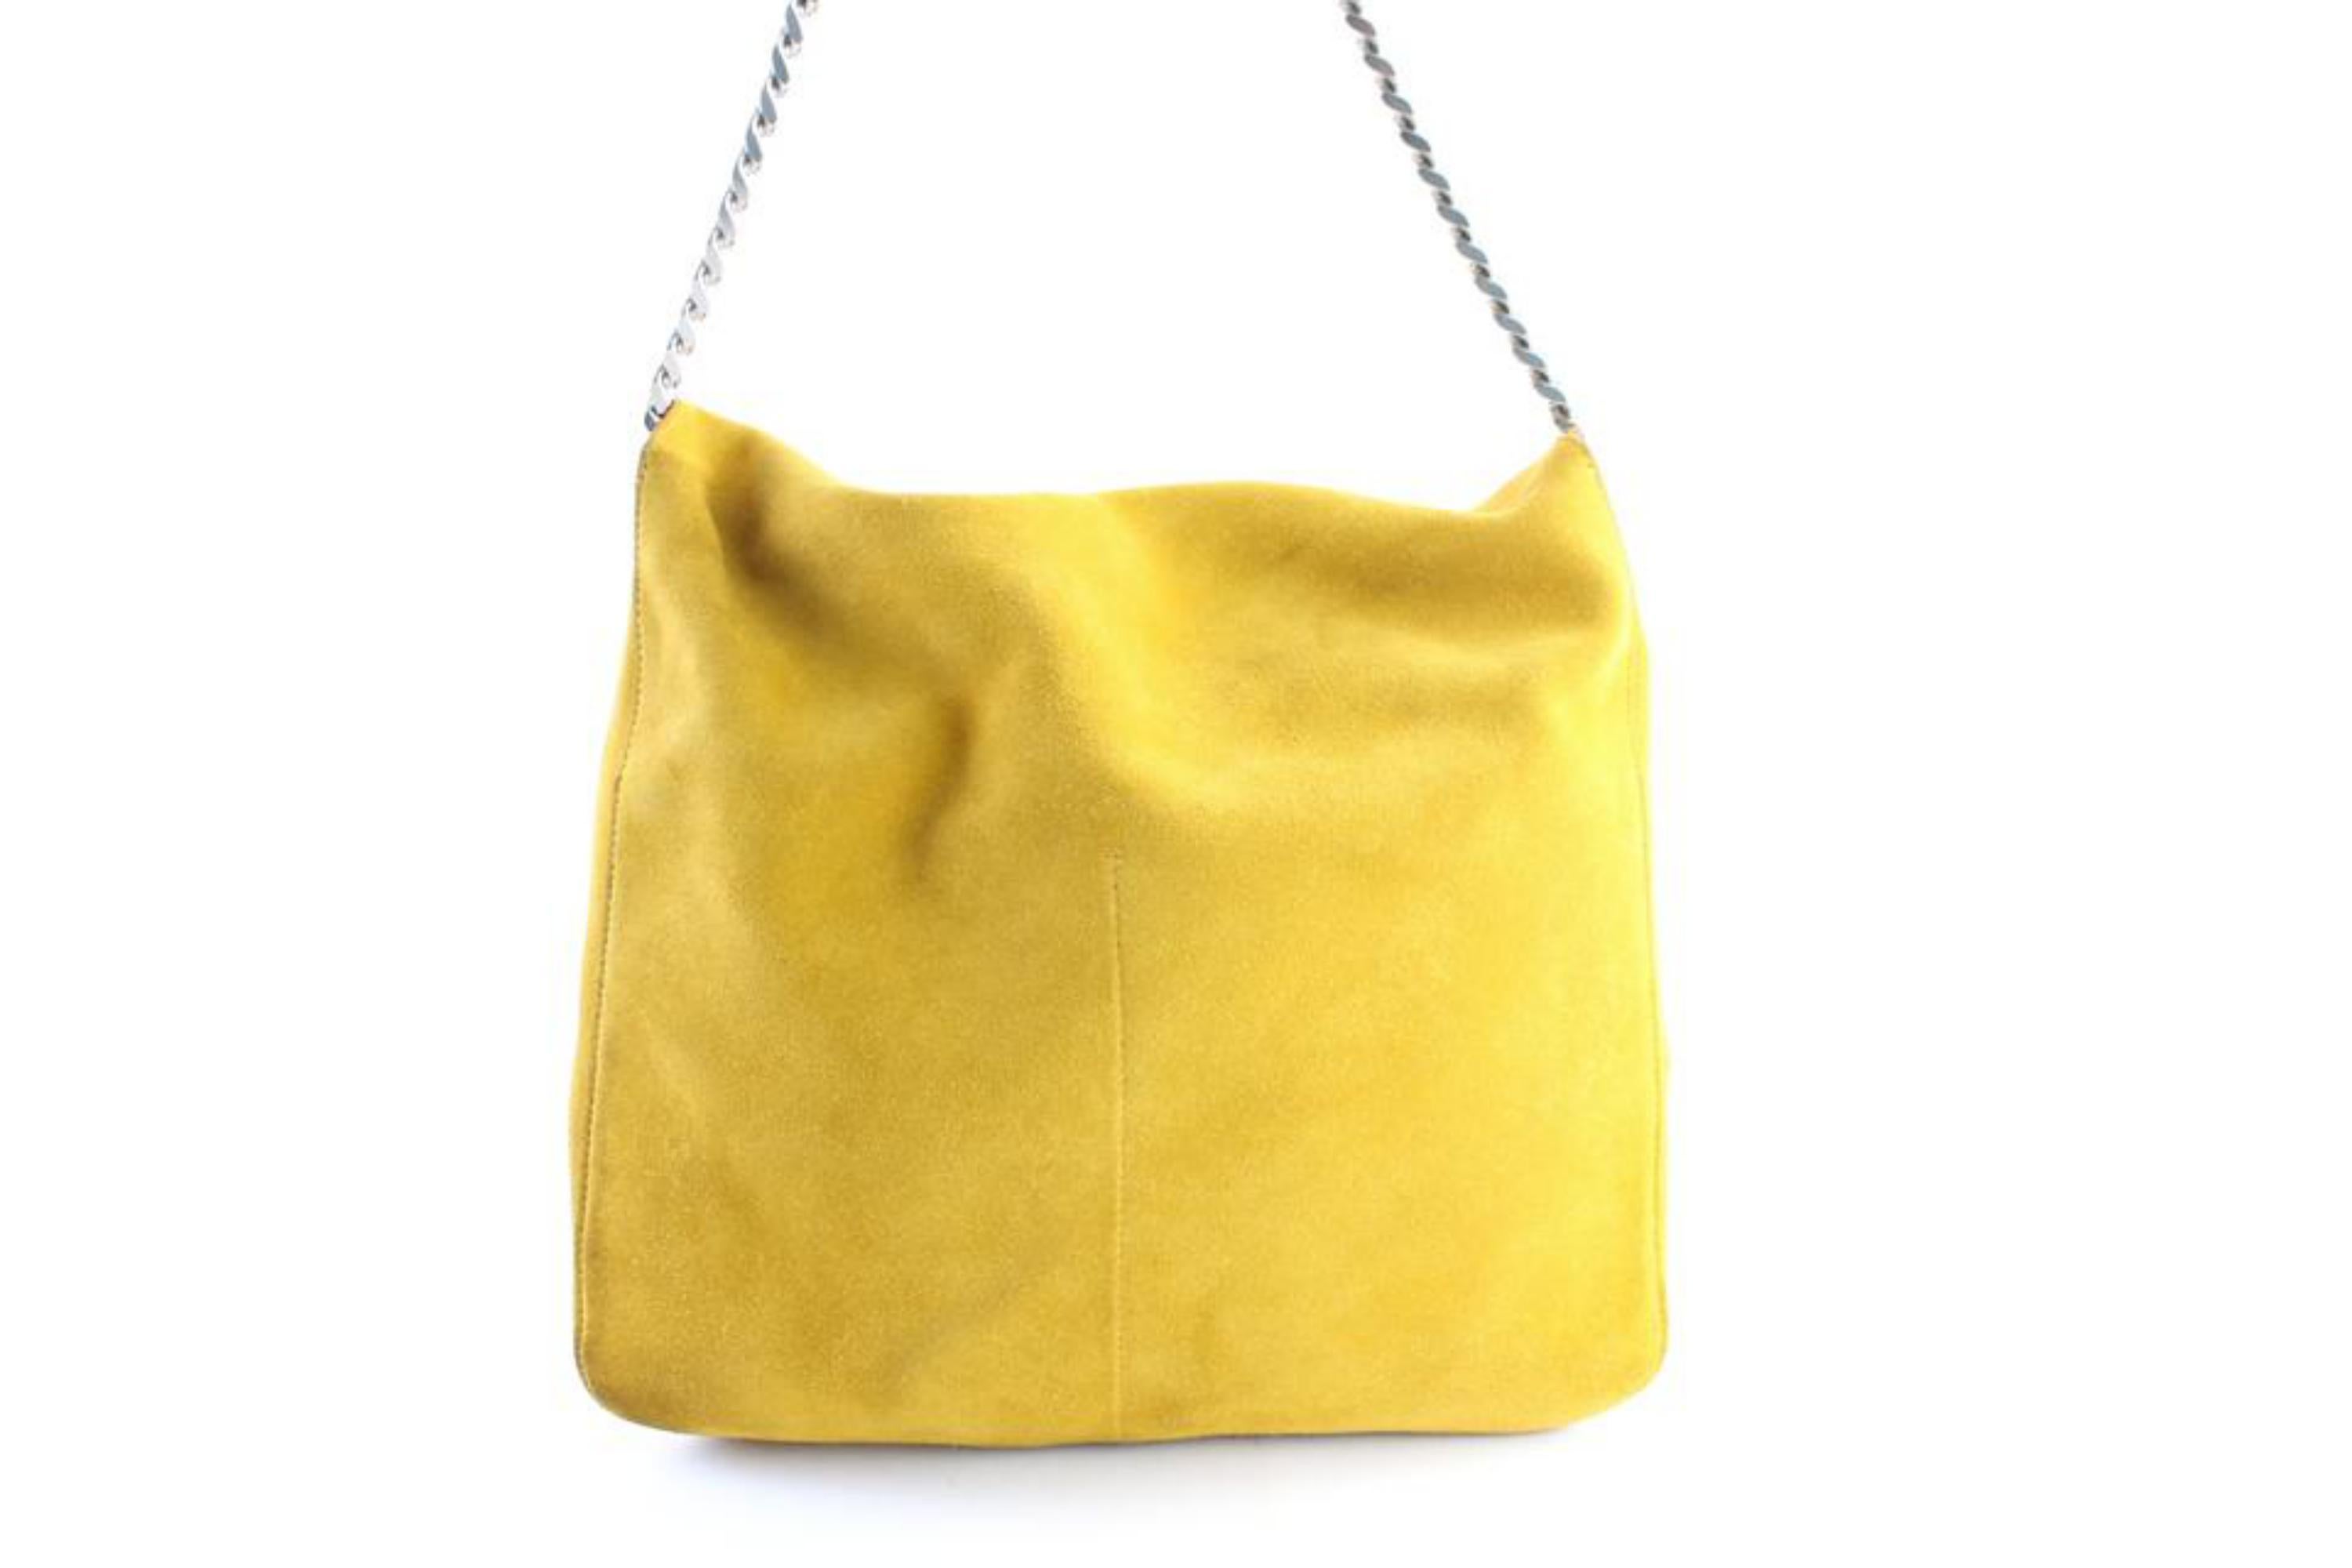 Céline Gourmette Hobo Chain 9cer0613 Mustard Yellow Suede Shoulder Bag For Sale 5